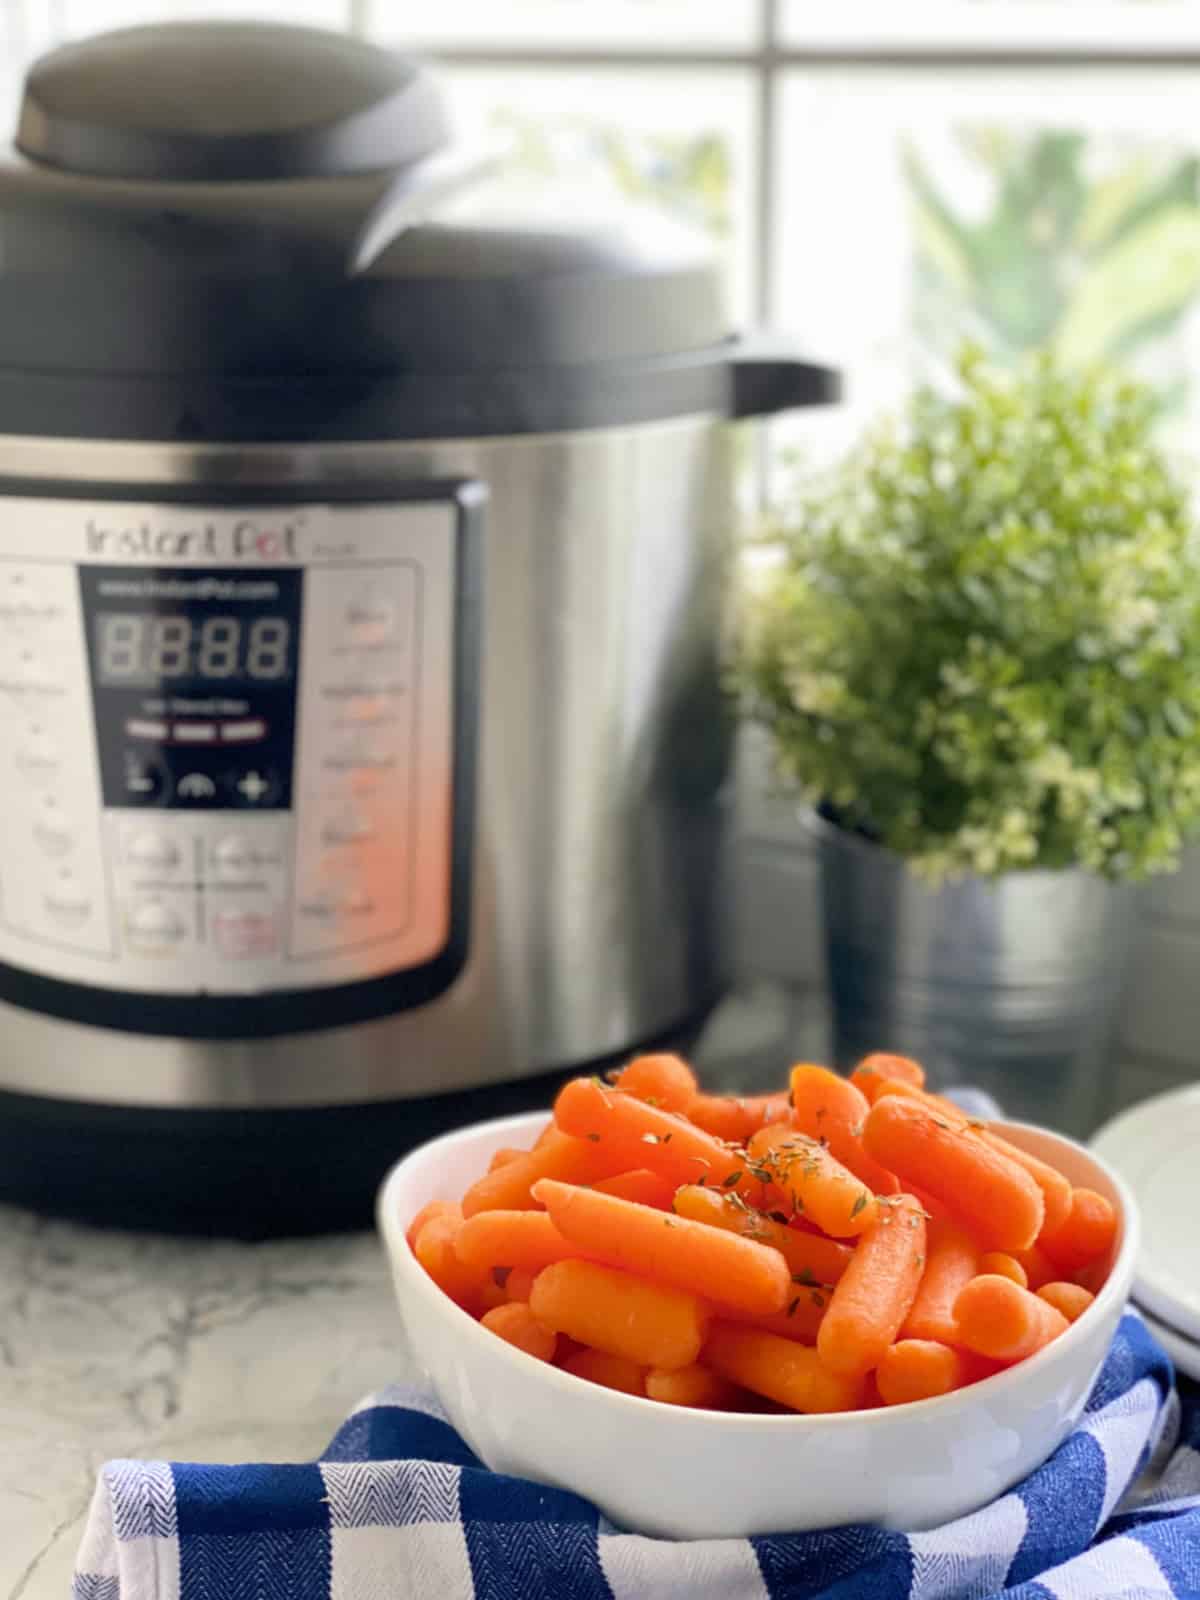 White bowl filled with carrots with Instant Pot in background.